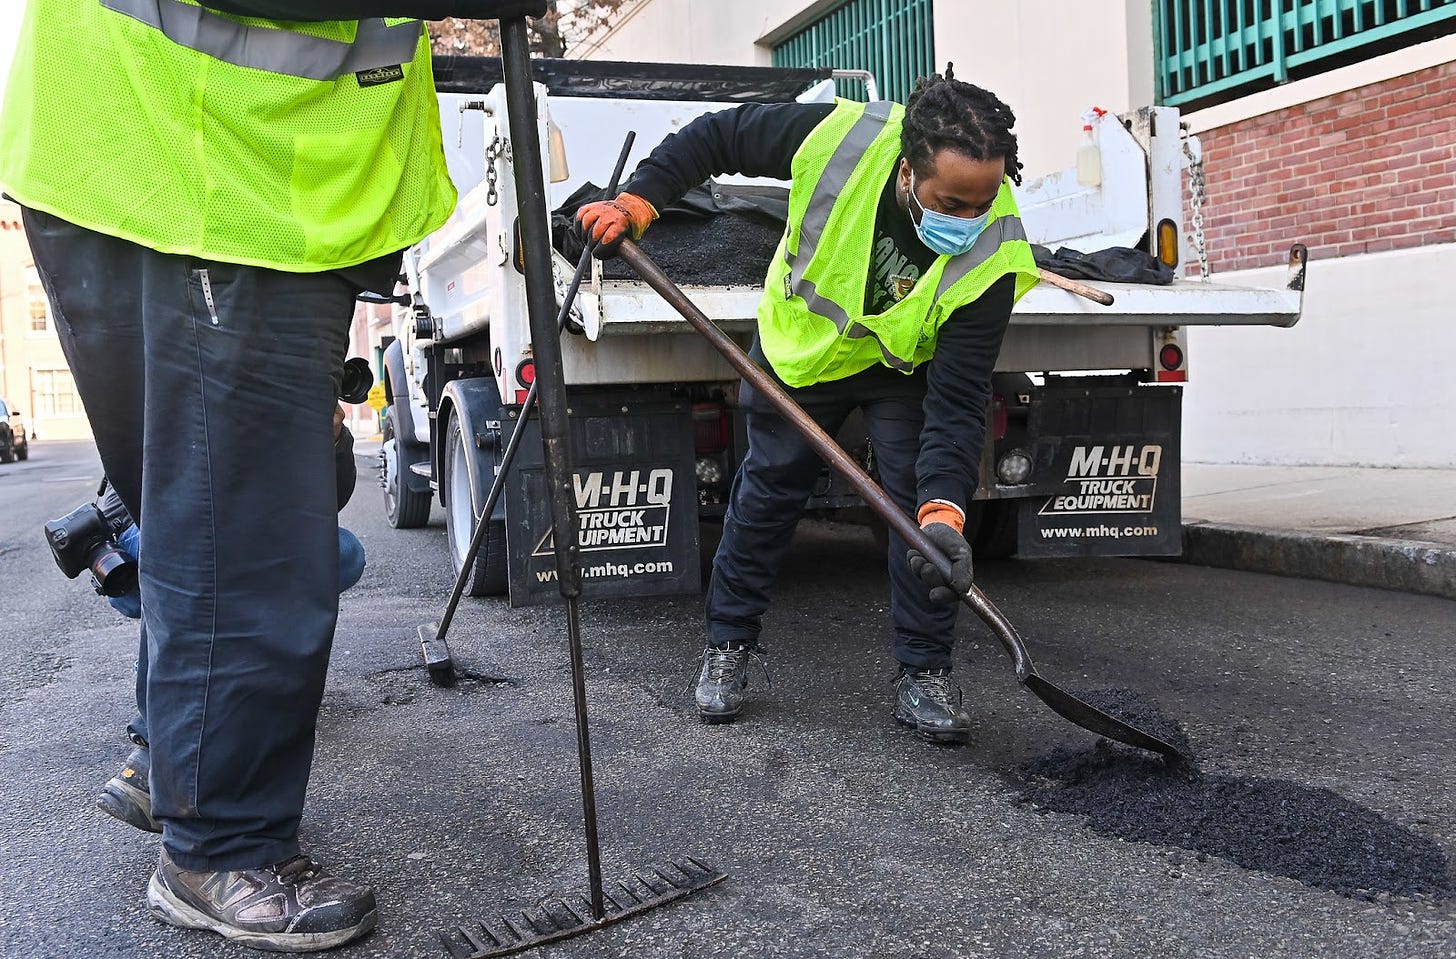 A public works team member wearing a neon safety vest uses a shovel to pile hot asphalt into the pothole to get ready for filling. Behind him, the white pick up truck has a heap of asphalt on the truck bed, covered by a tarp